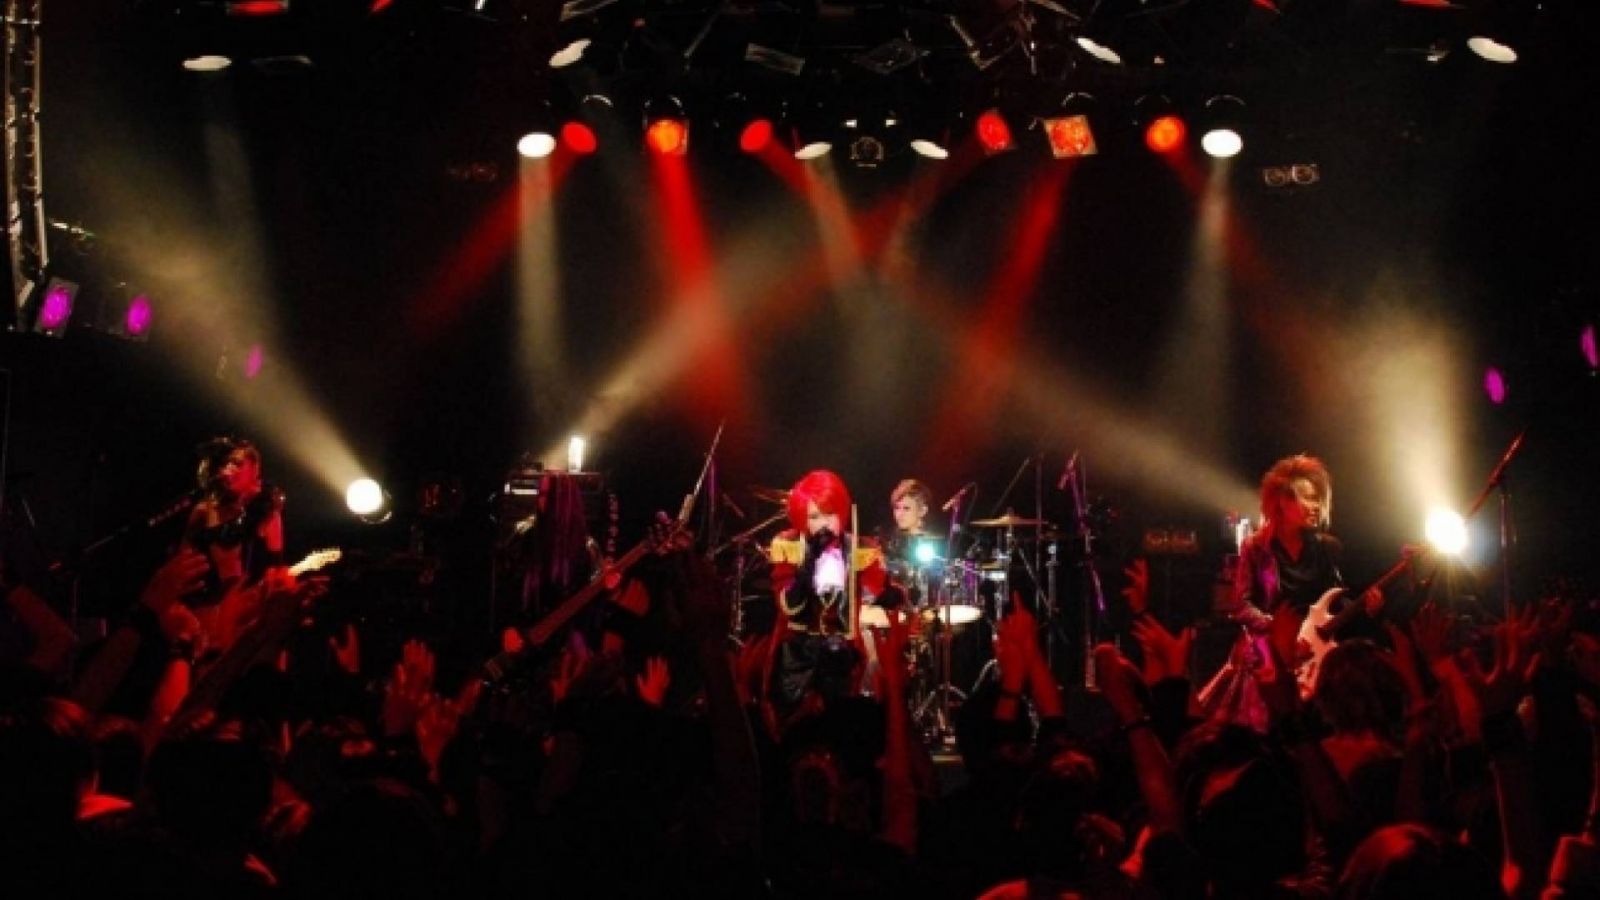 Show One-Man do exist†trace, THE FIRST DAYBREAK © exist†trace